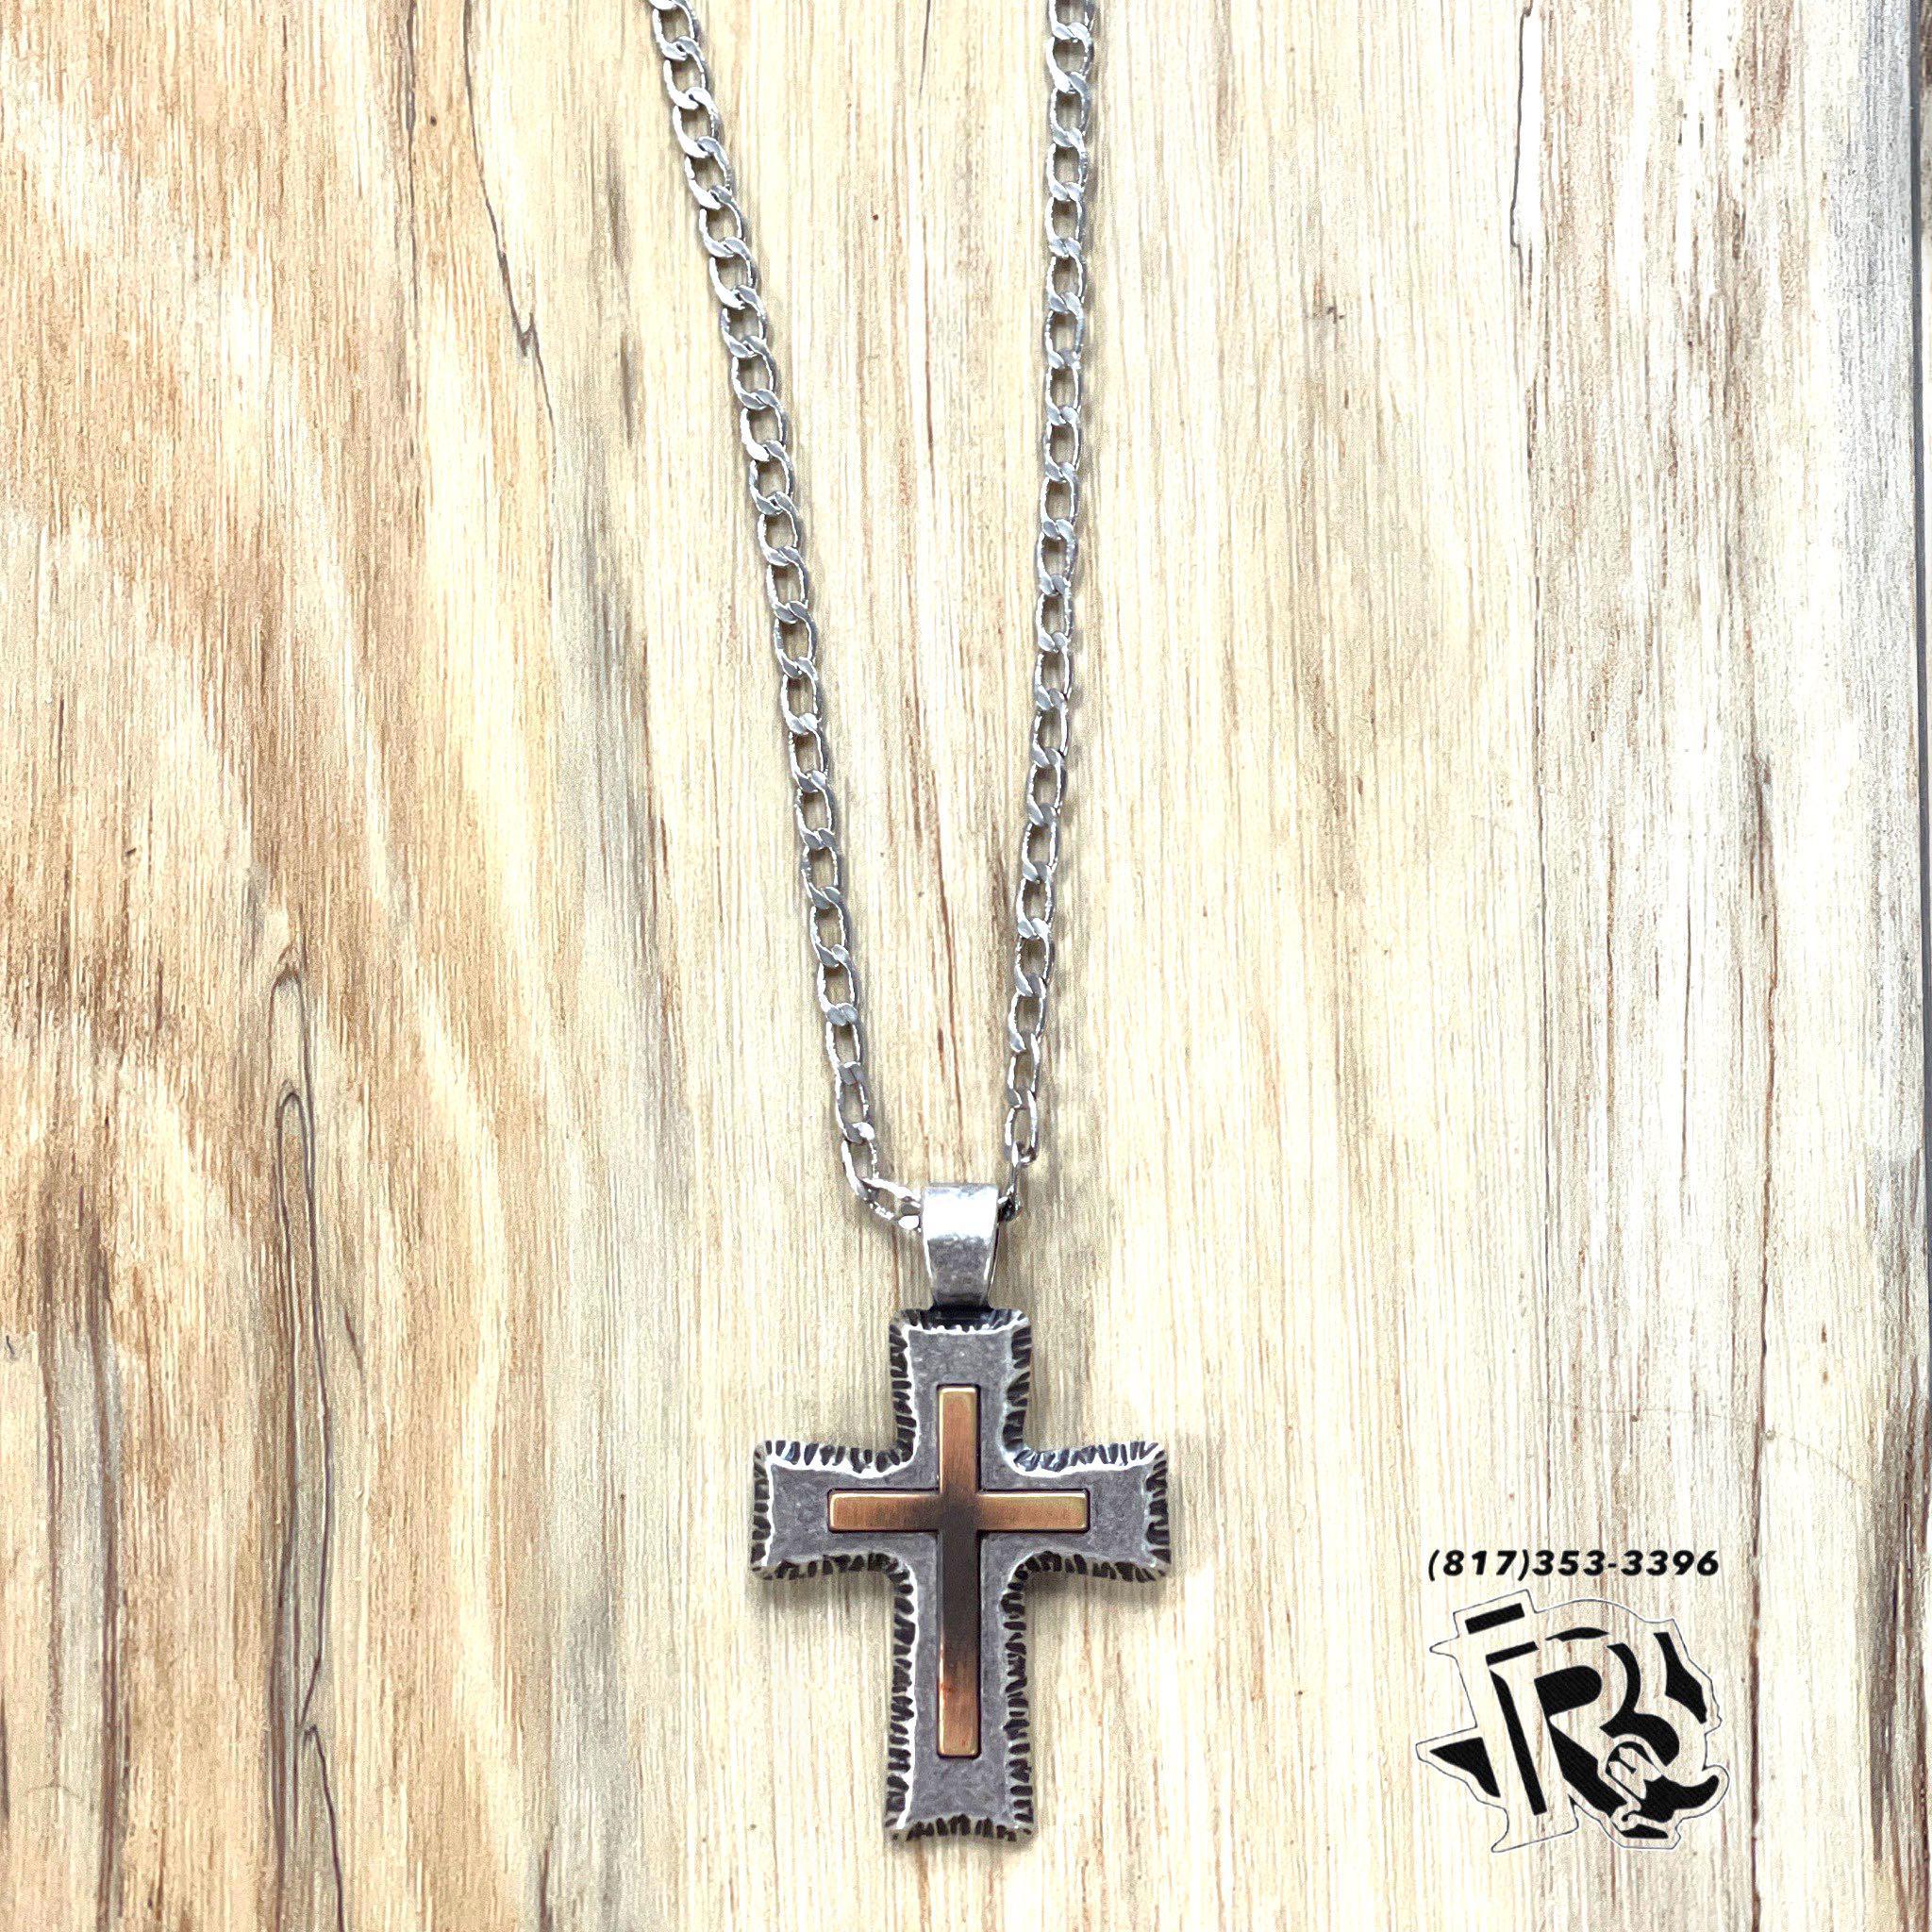 two Tone Cross Necklace 32158 - Diamond T Outfitters